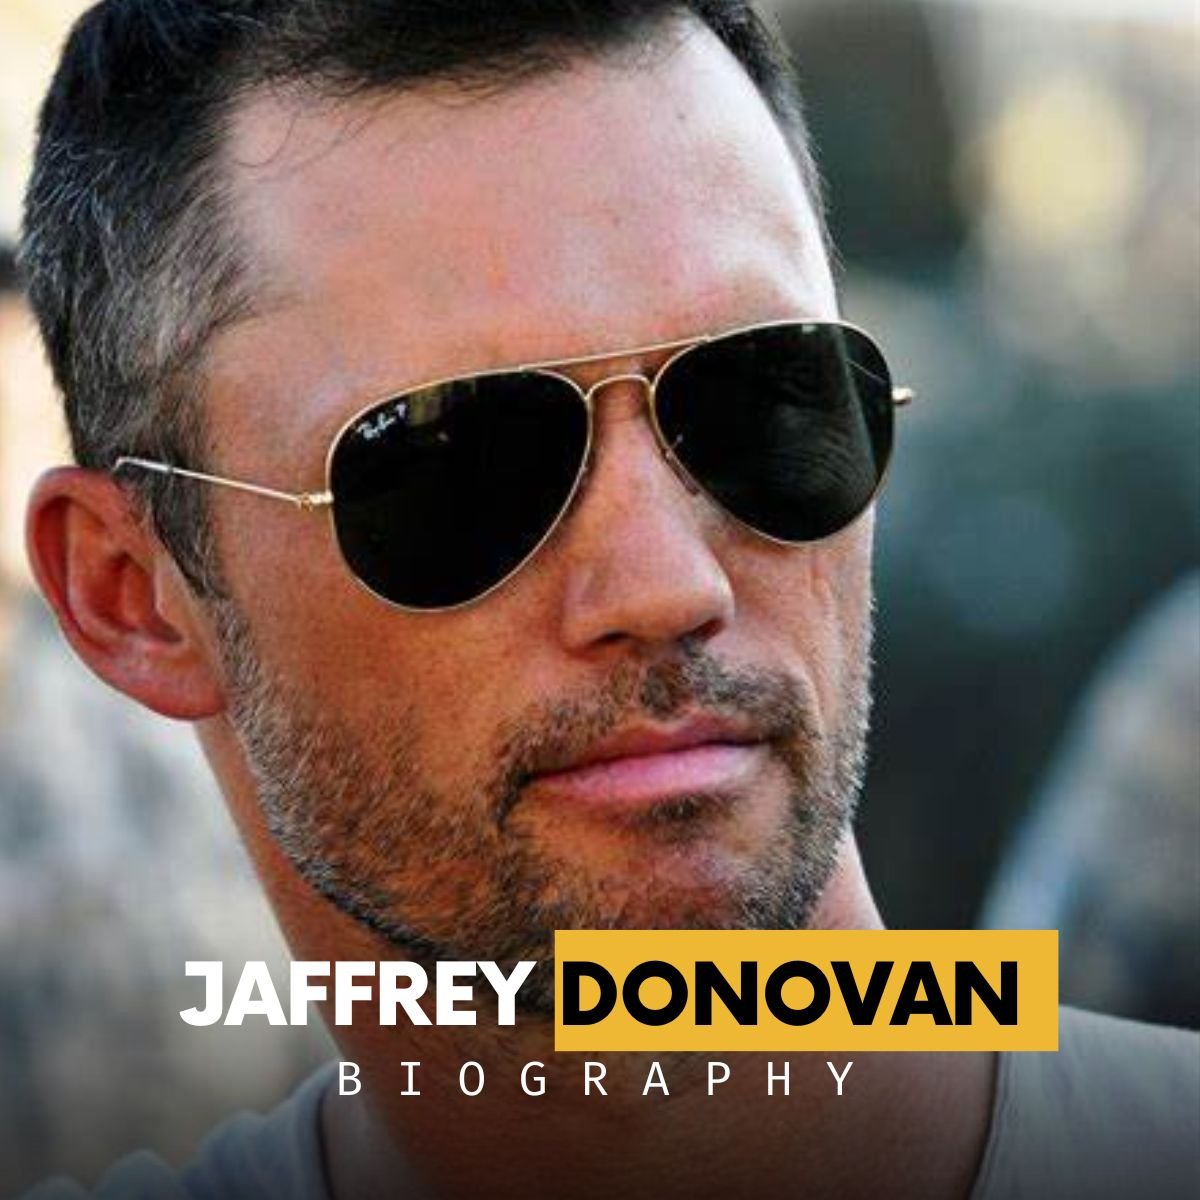 Picture of Jaffrey Donovan from an event